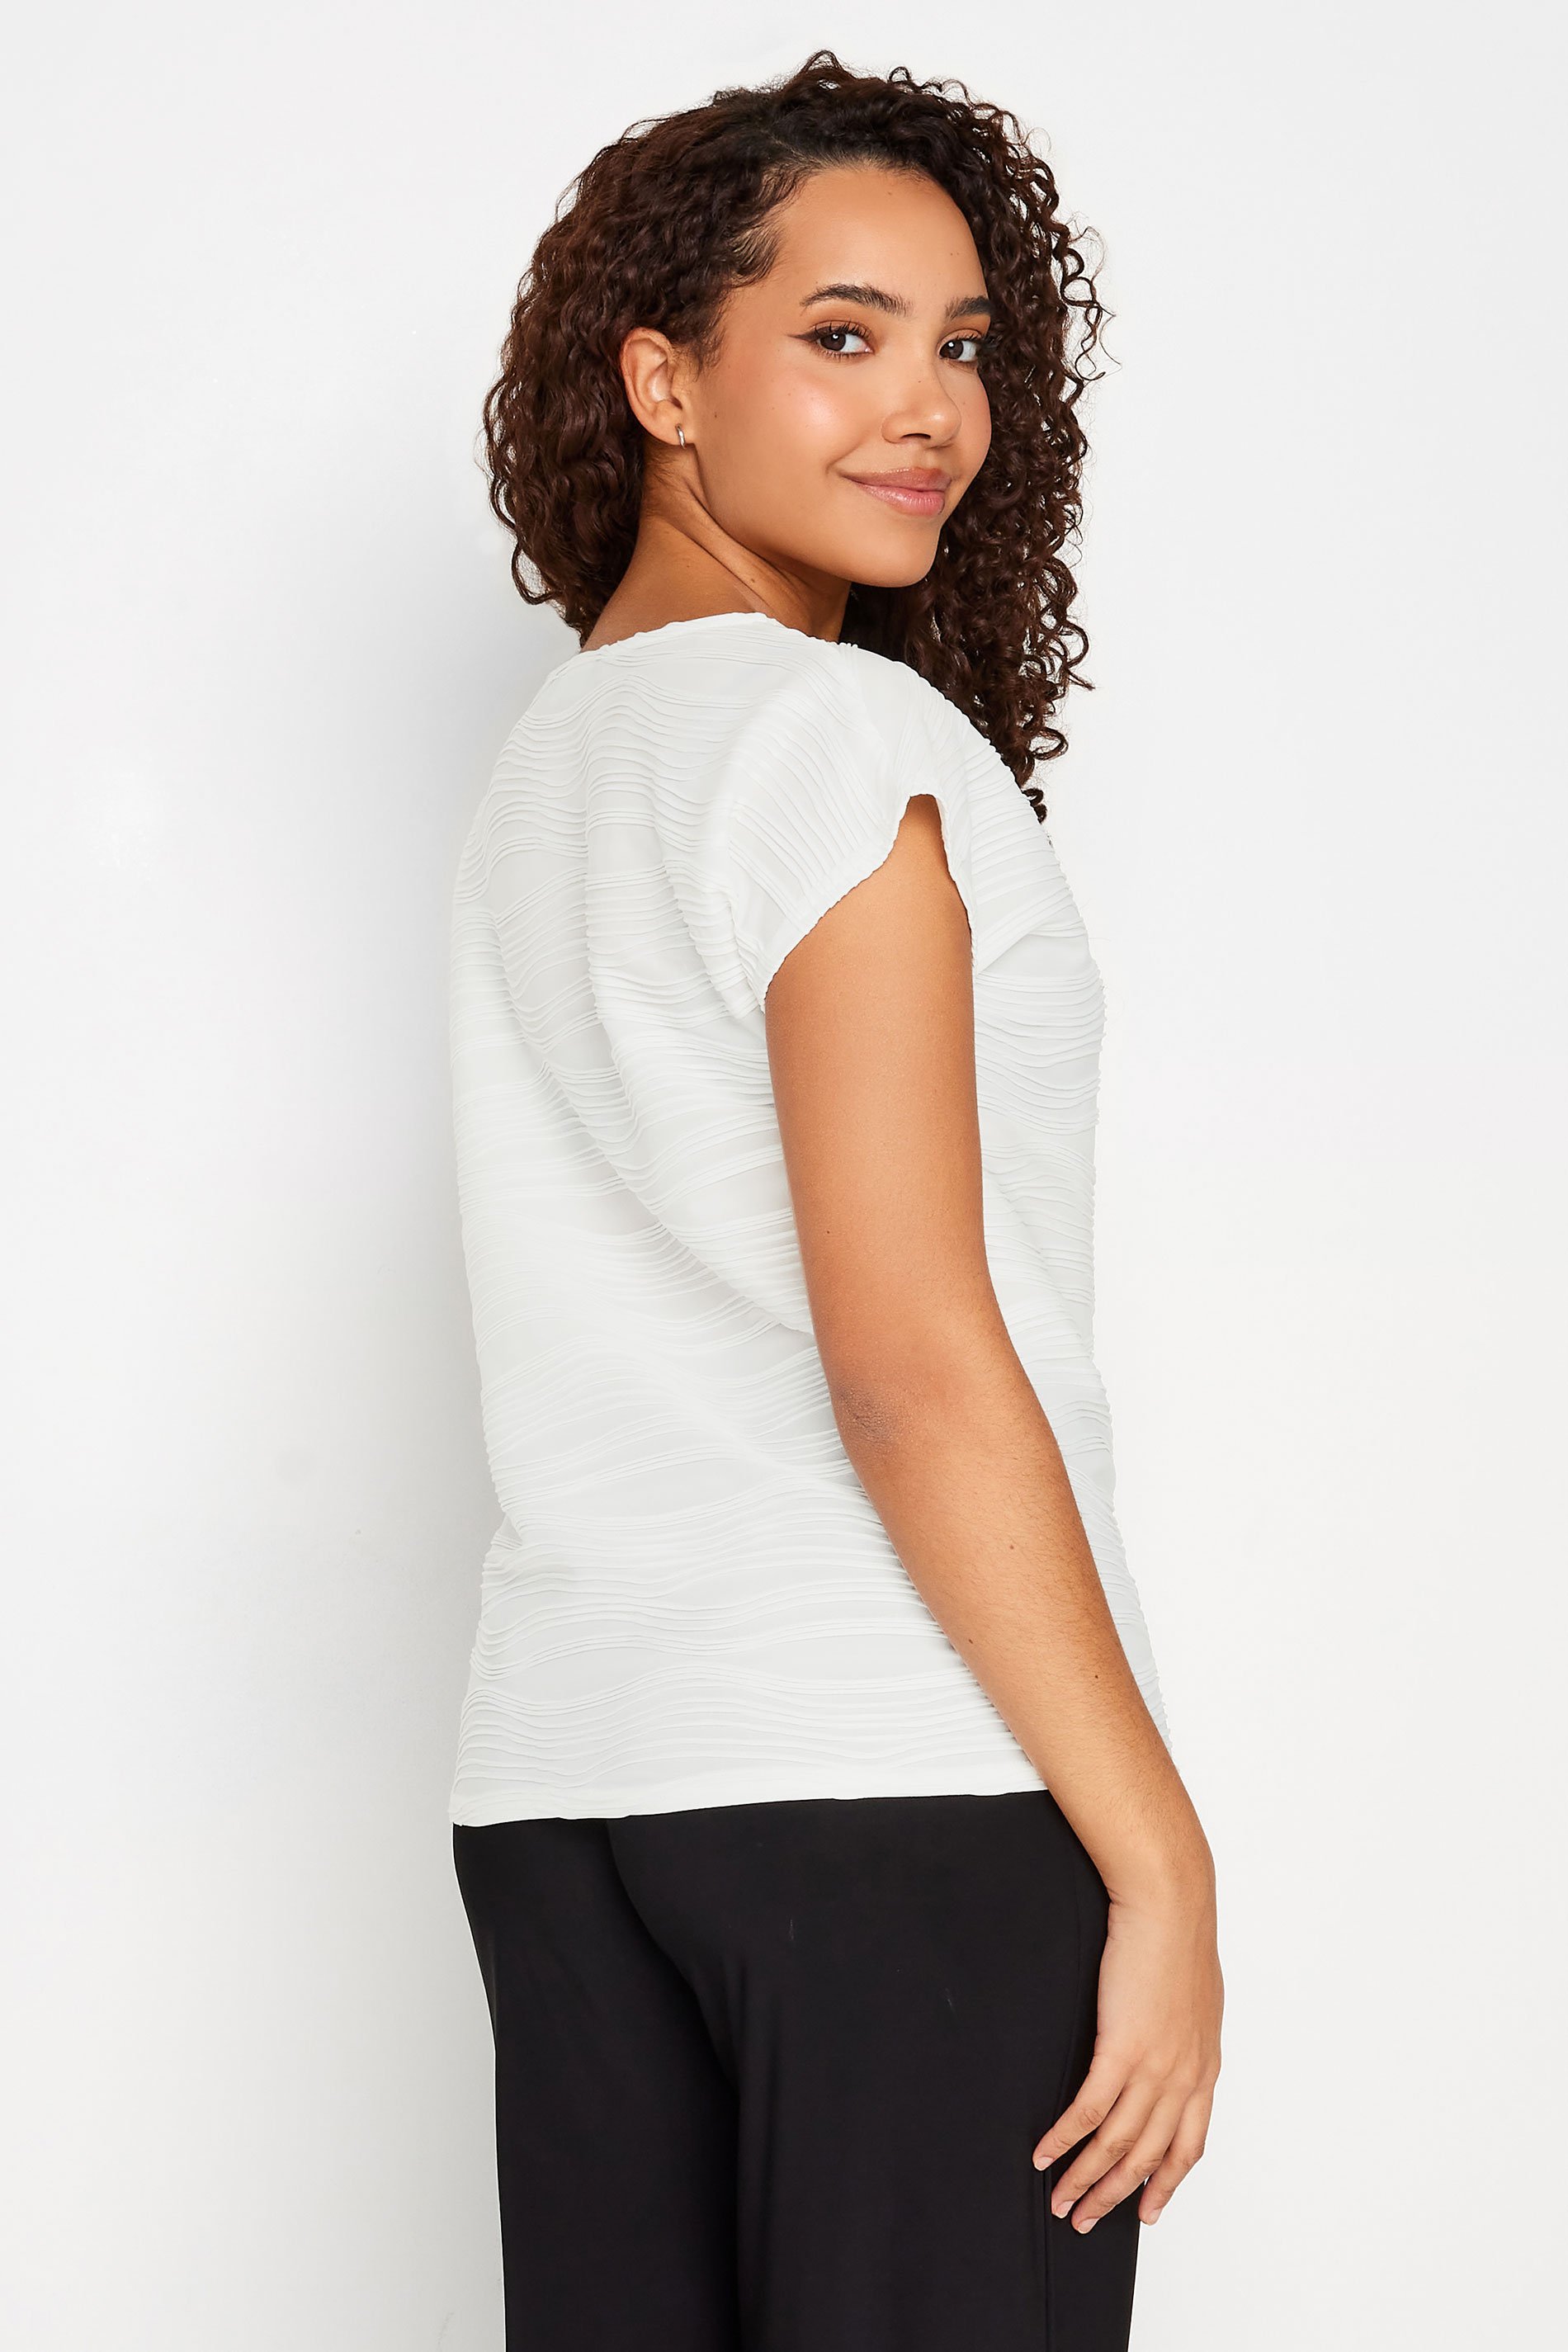 M&Co Ivory White Textured Top | M&Co 3